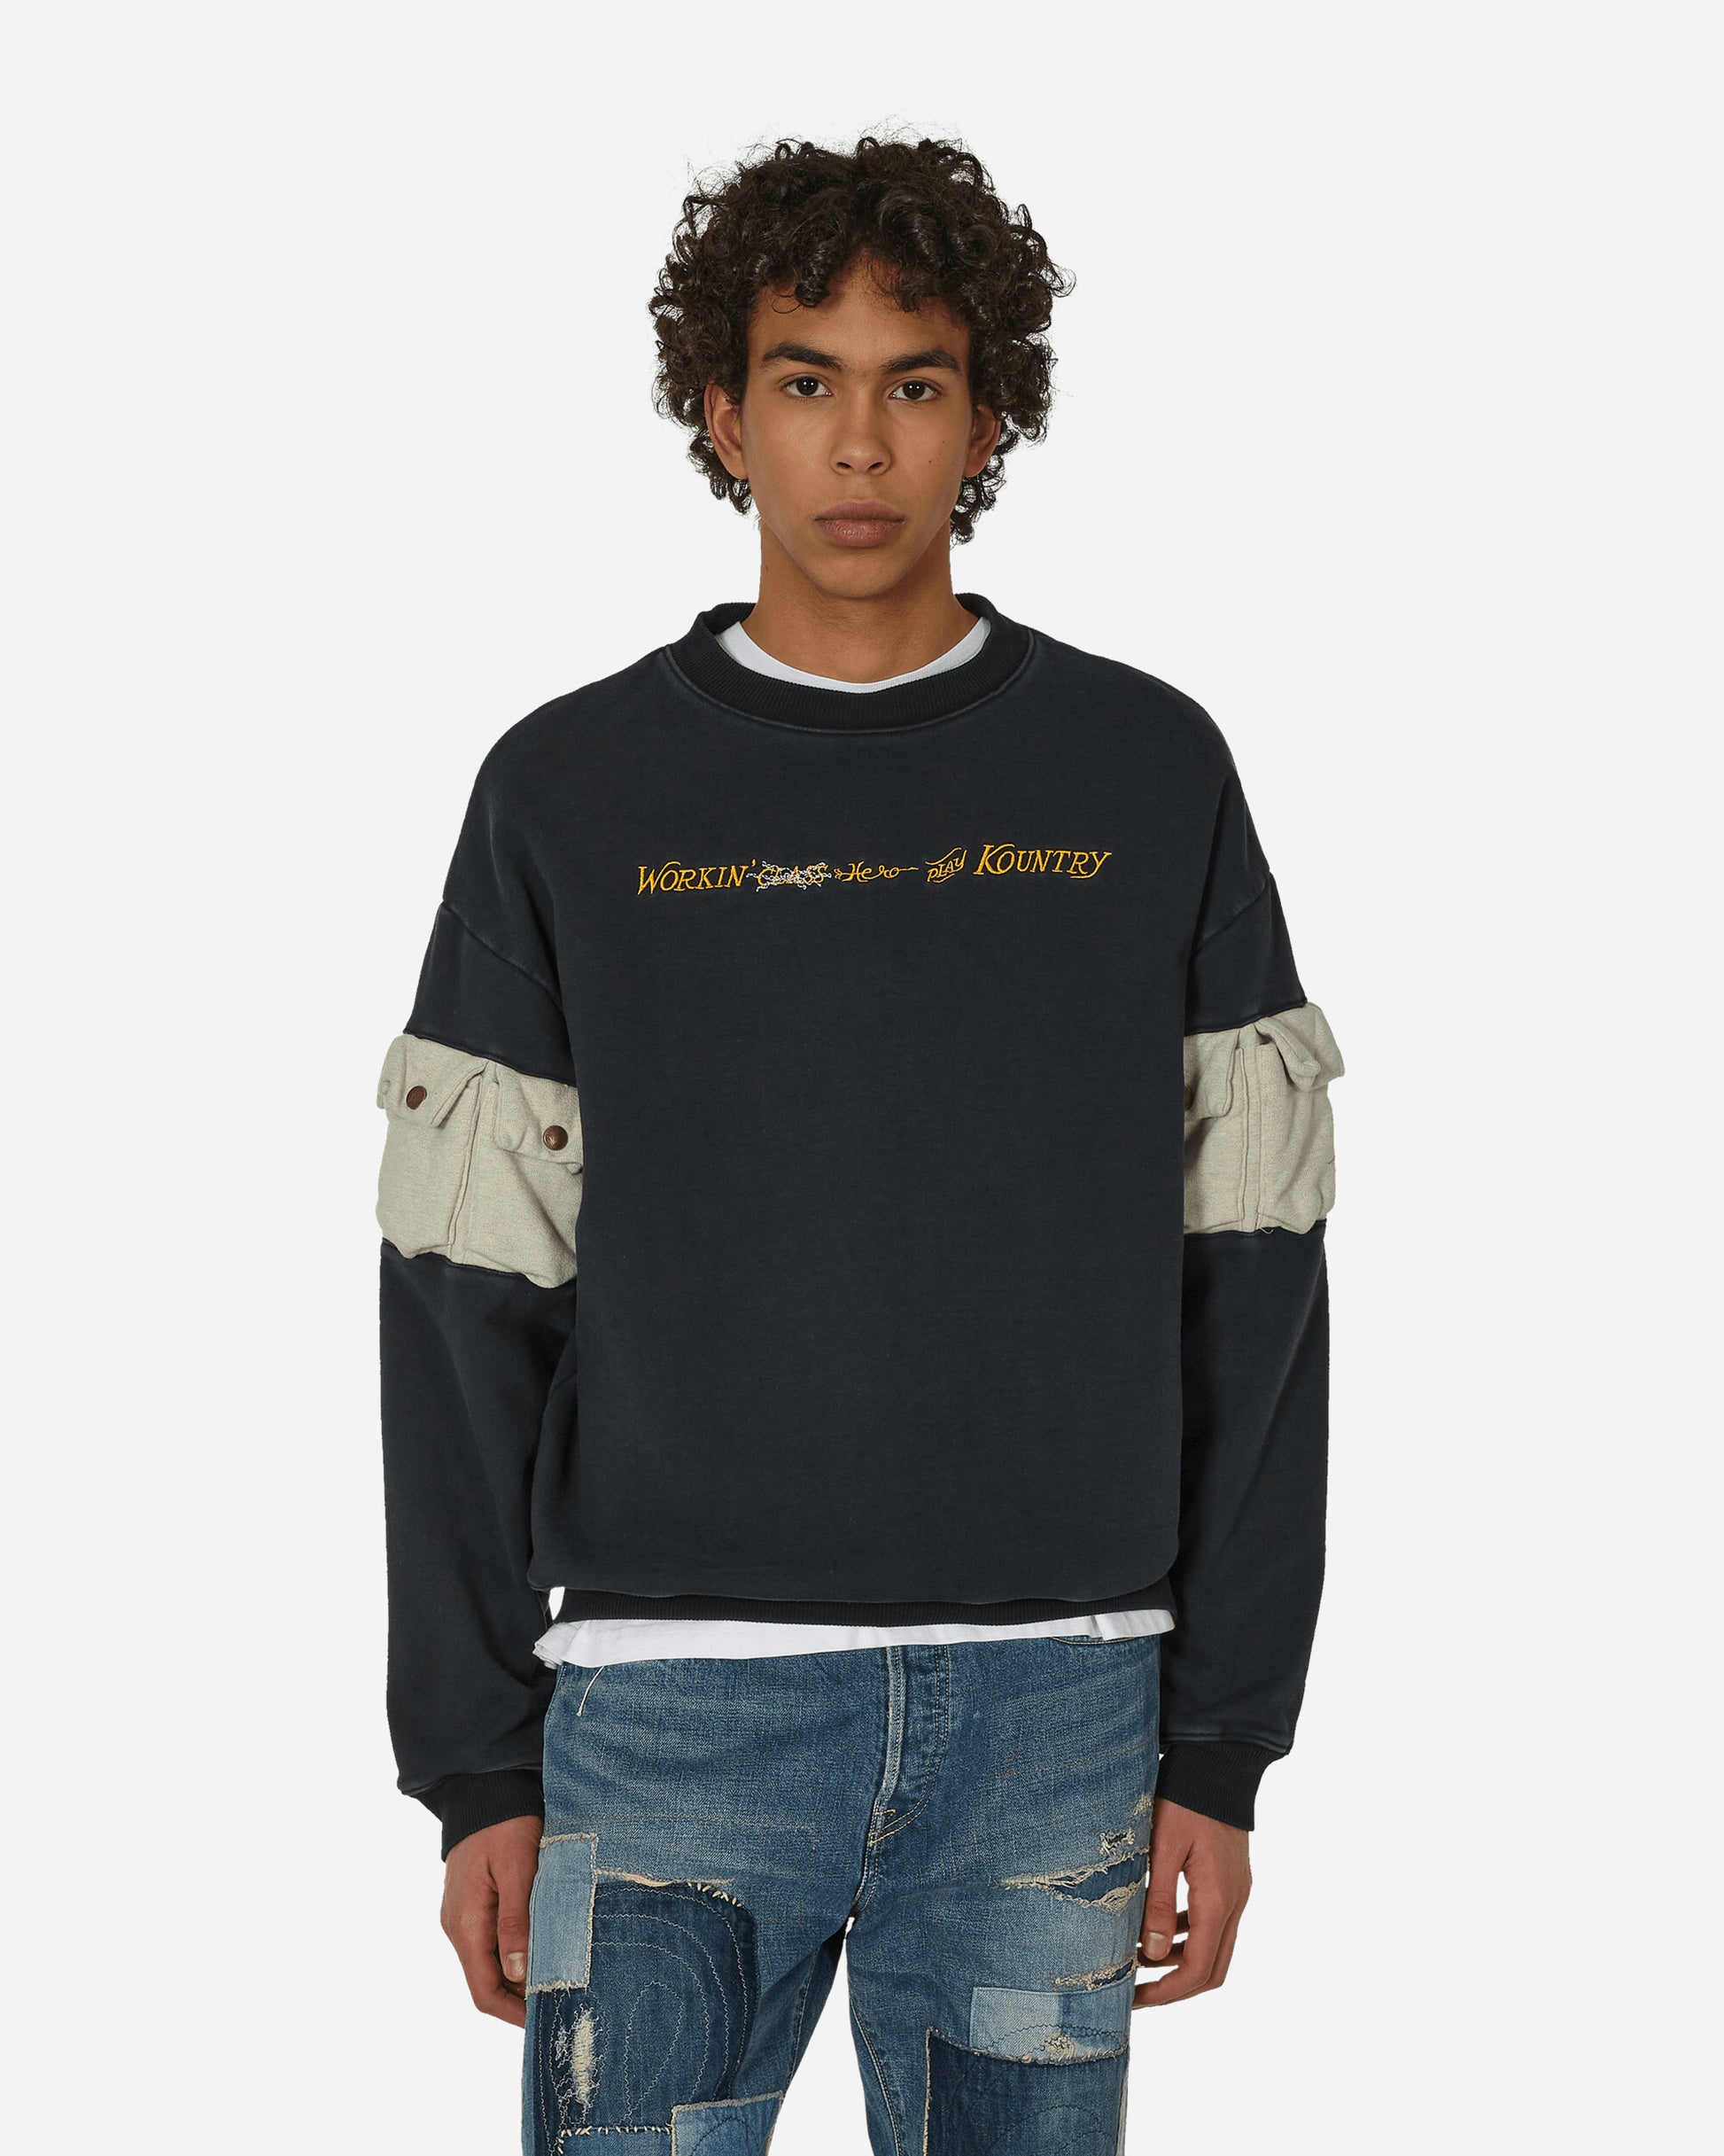 KAPITAL Swt Knit 2Tones Nickle"8" Sleve Swt (Working Embroidery) Black Sweatshirts Crewneck K2310LC127 1